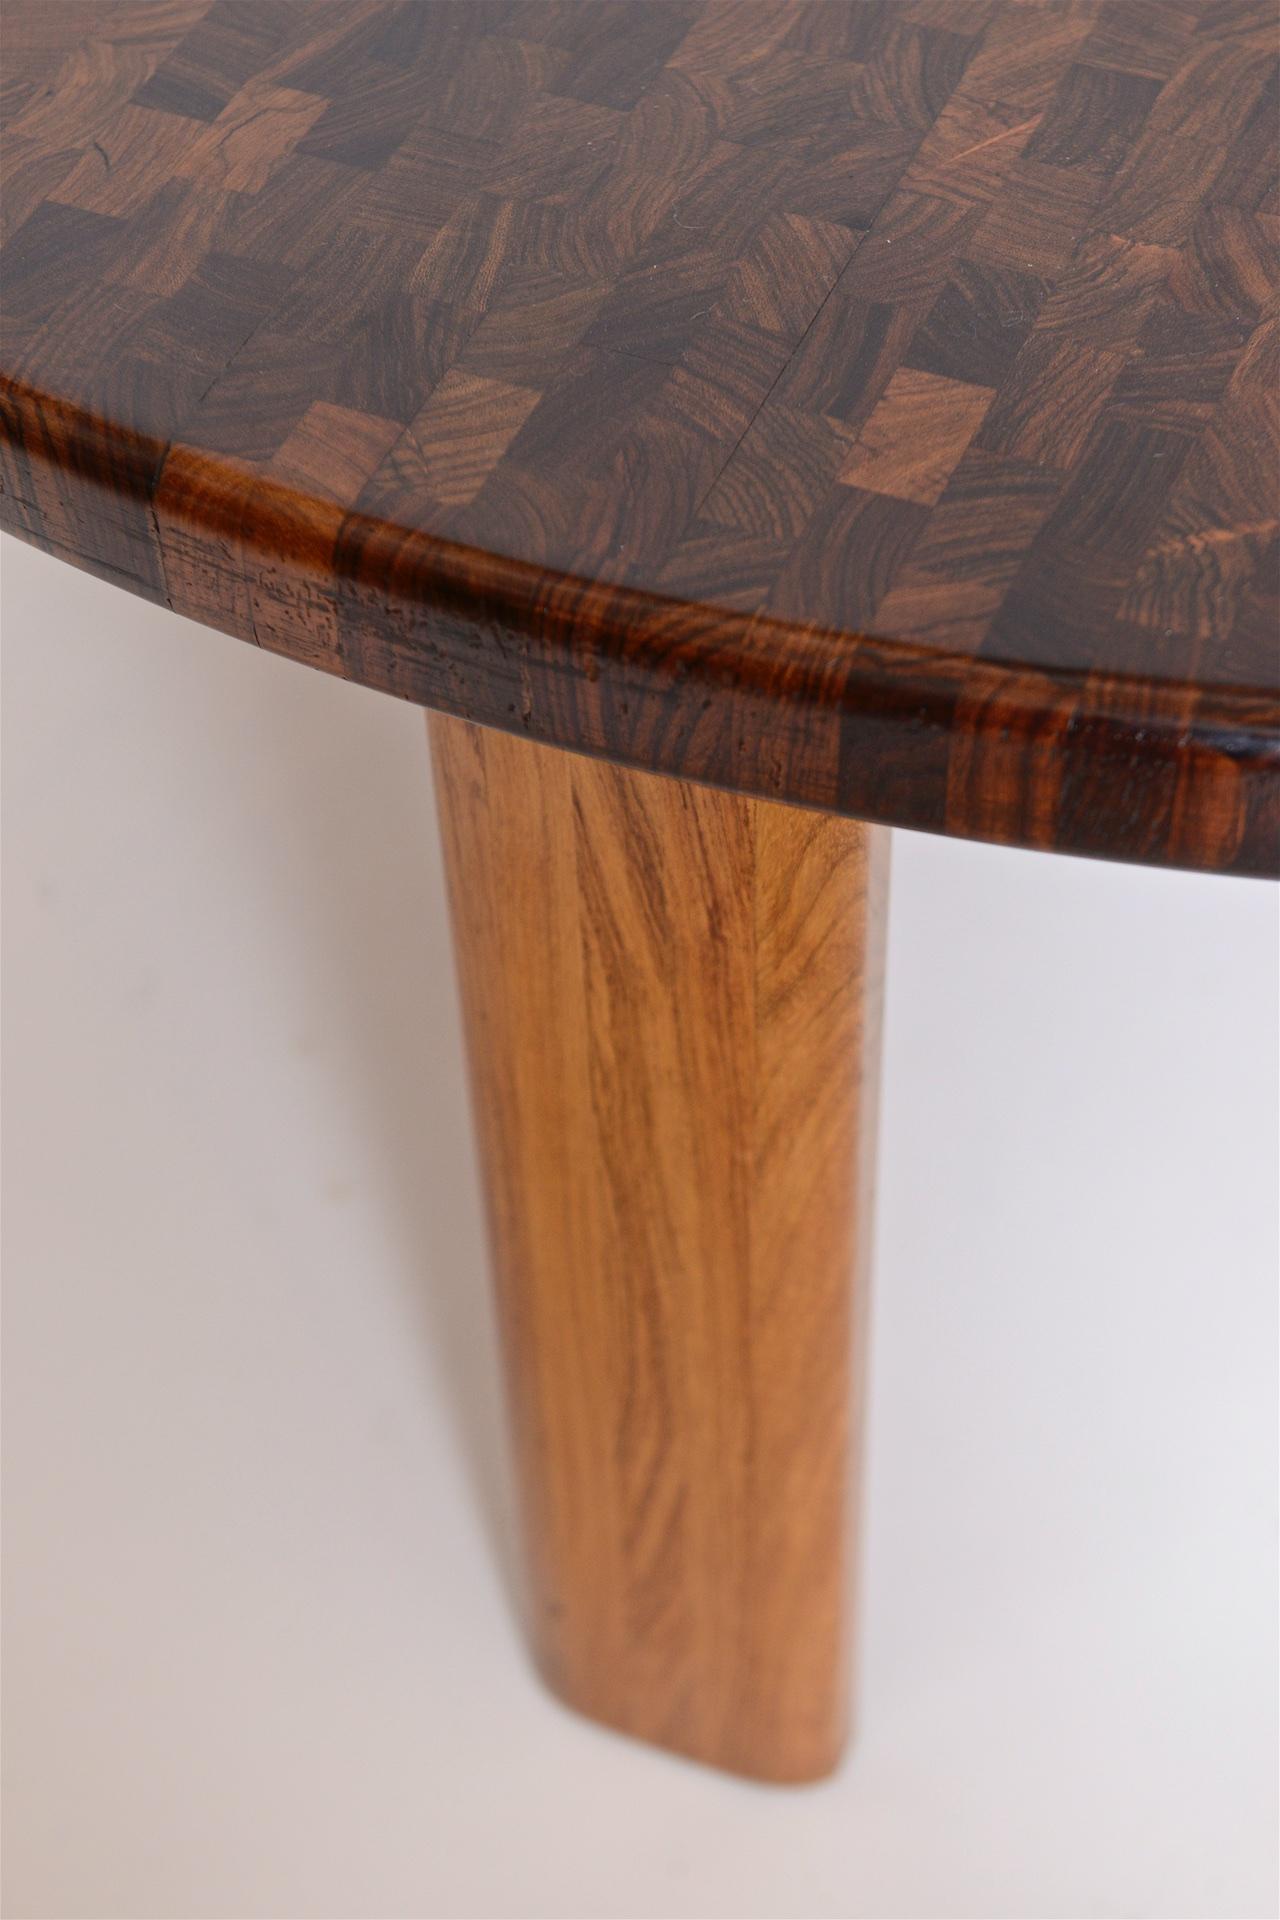 Mid-20th Century Danish Midcentury Rosewood Parquetry Coffee Table